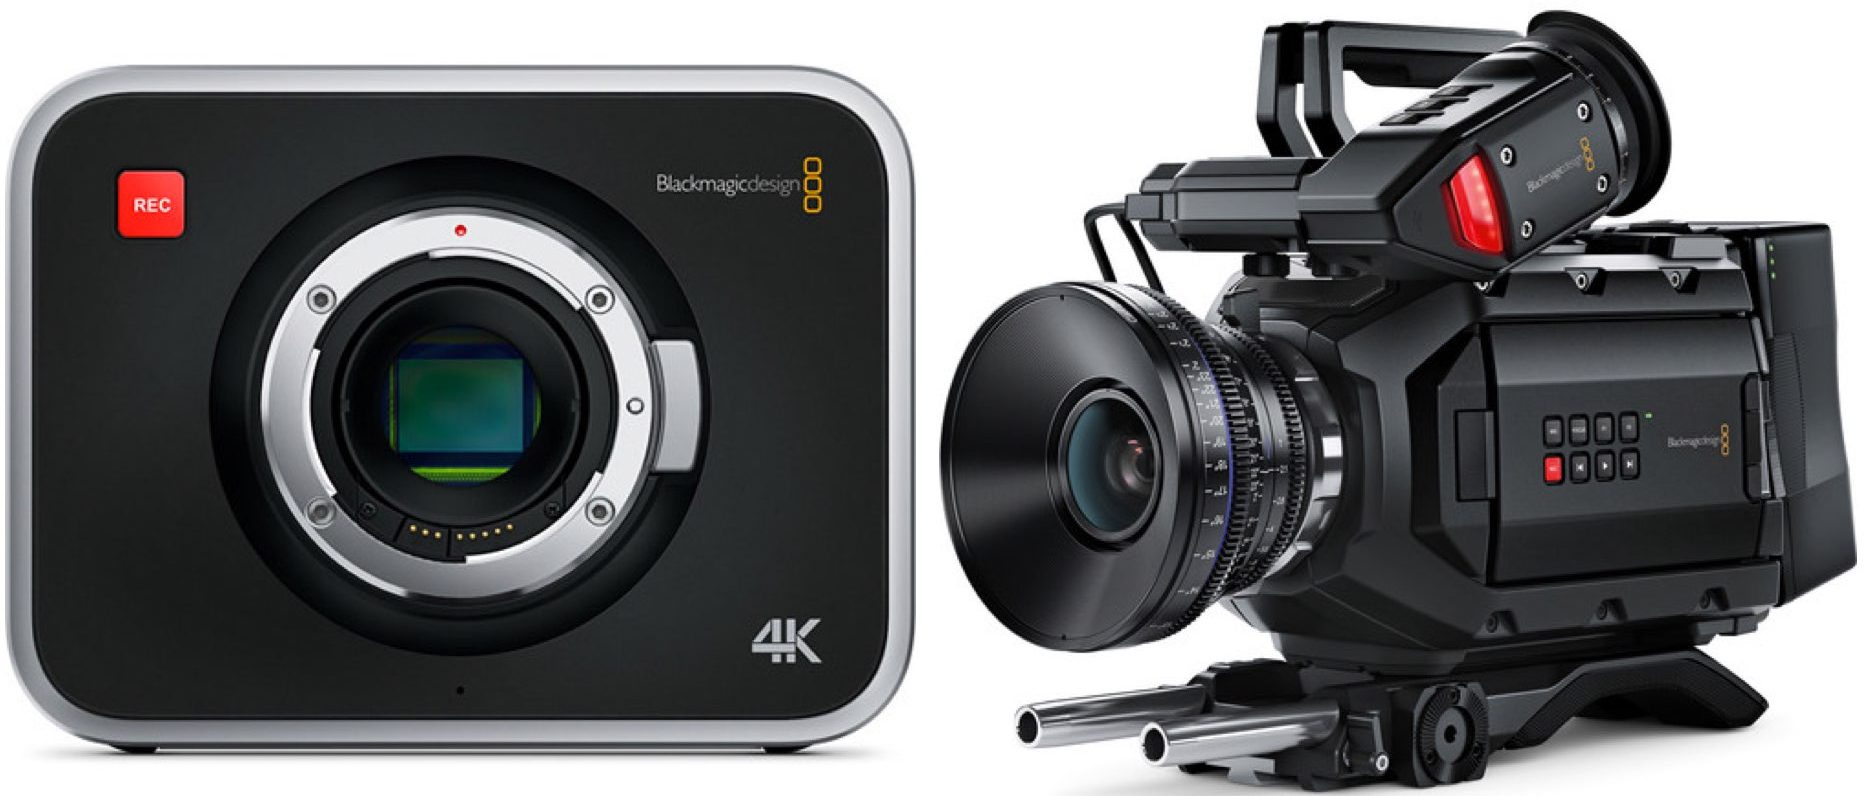 Blackmagic old cinema cameras - BRAW not supported